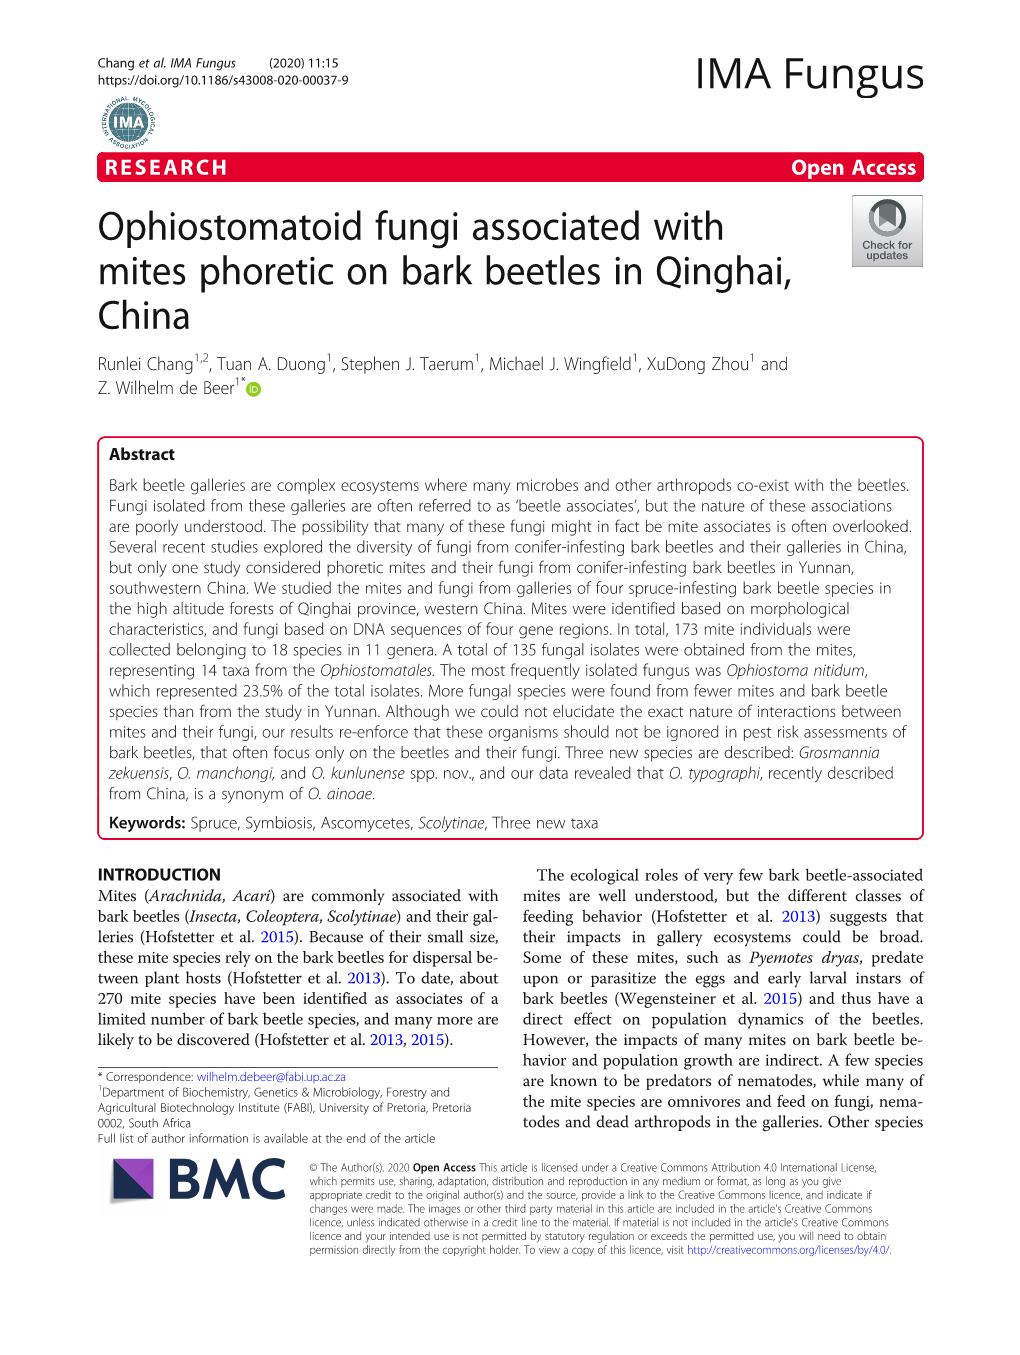 Ophiostomatoid Fungi Associated with Mites Phoretic on Bark Beetles in Qinghai, China Runlei Chang1,2, Tuan A